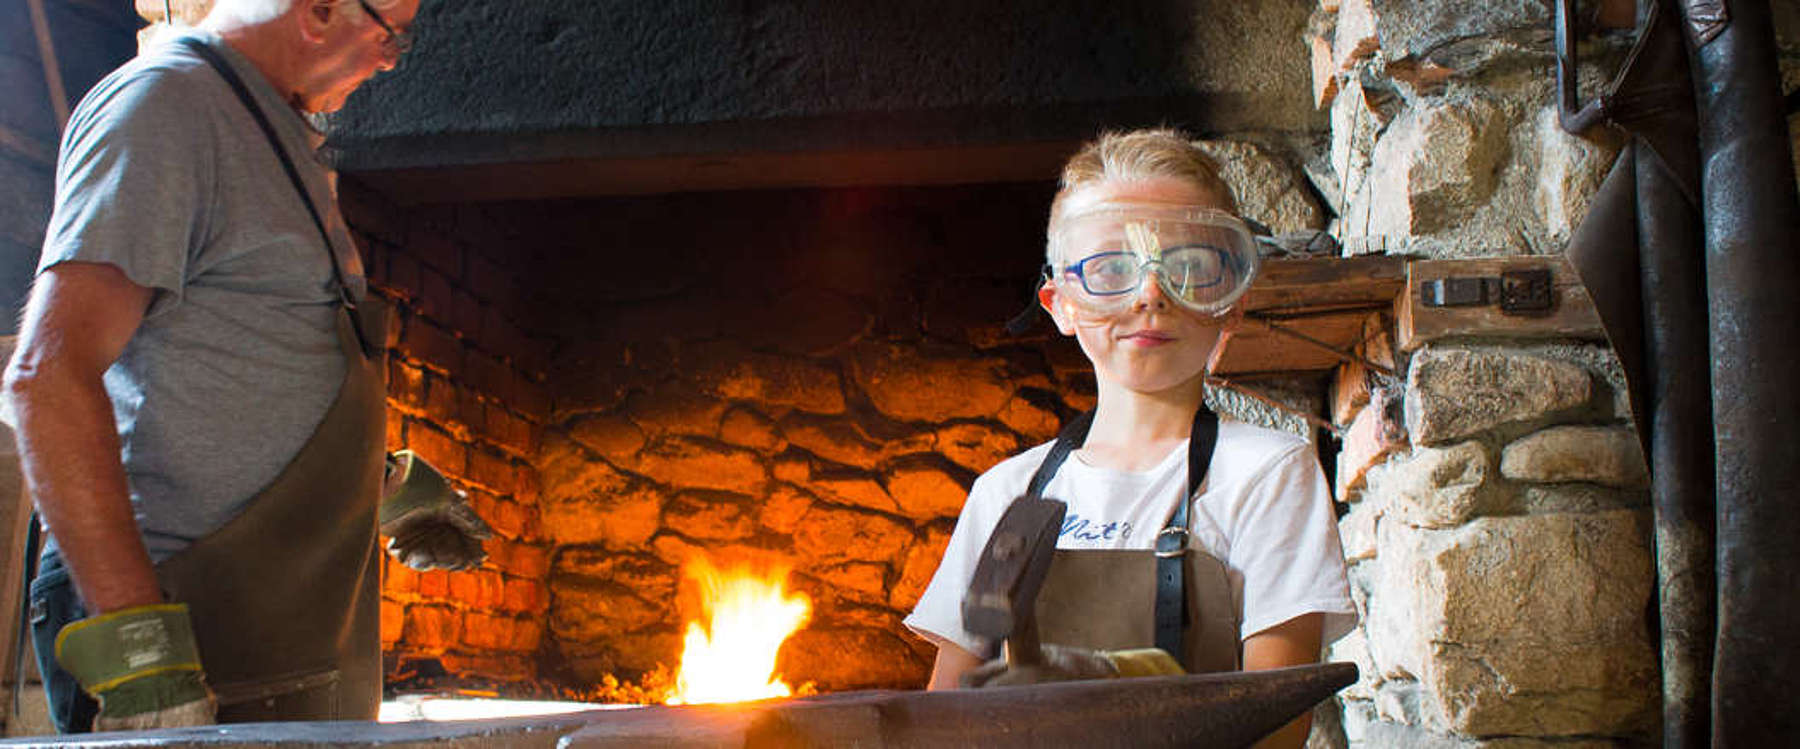 Blacksmithing for children at the Finsterau Open-Air Museum